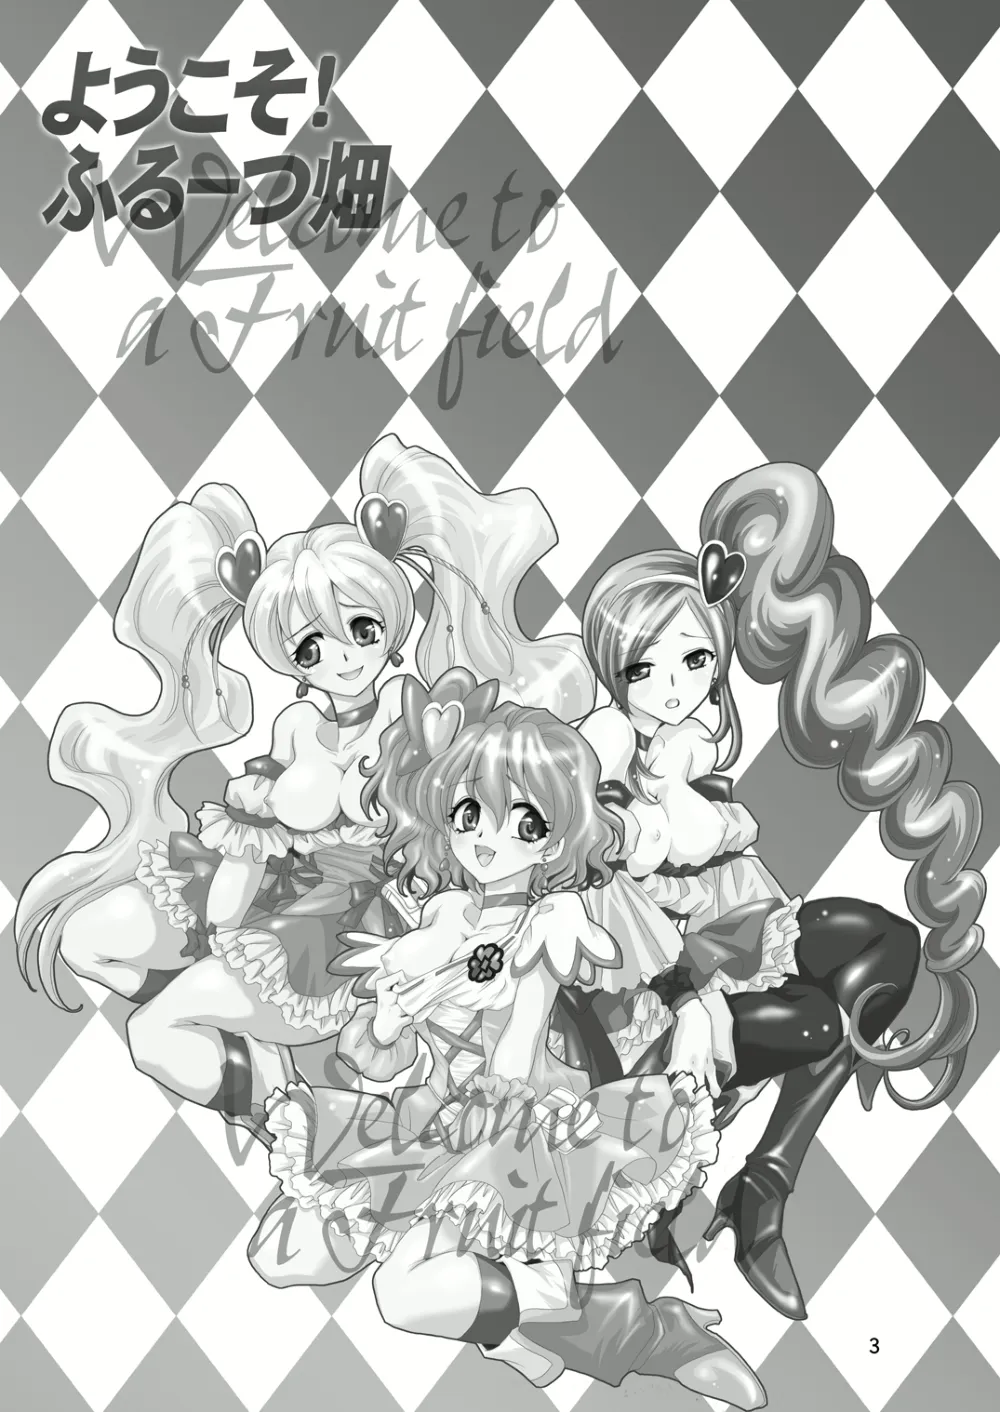 Fresh PrecurePretty Cure,Welcome To A Fruit Field [English][第3页]